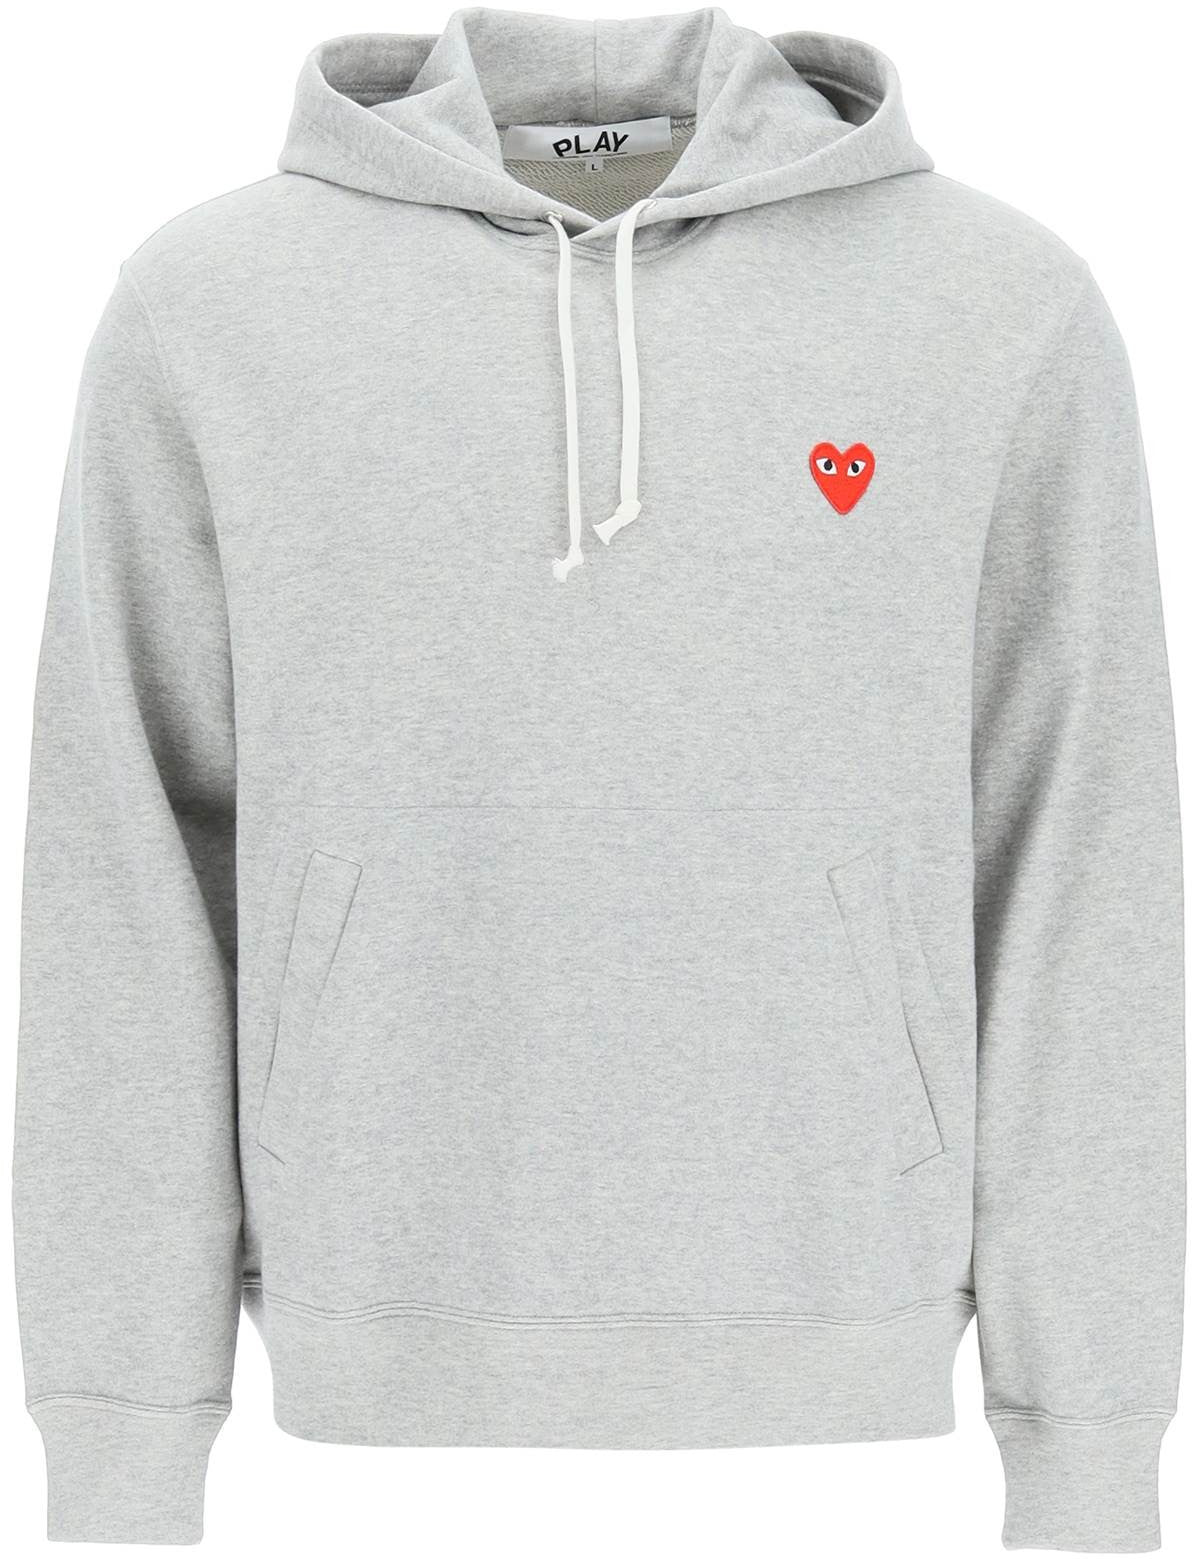 comme-des-garcons-play-heart-patch-hoodie.jpg